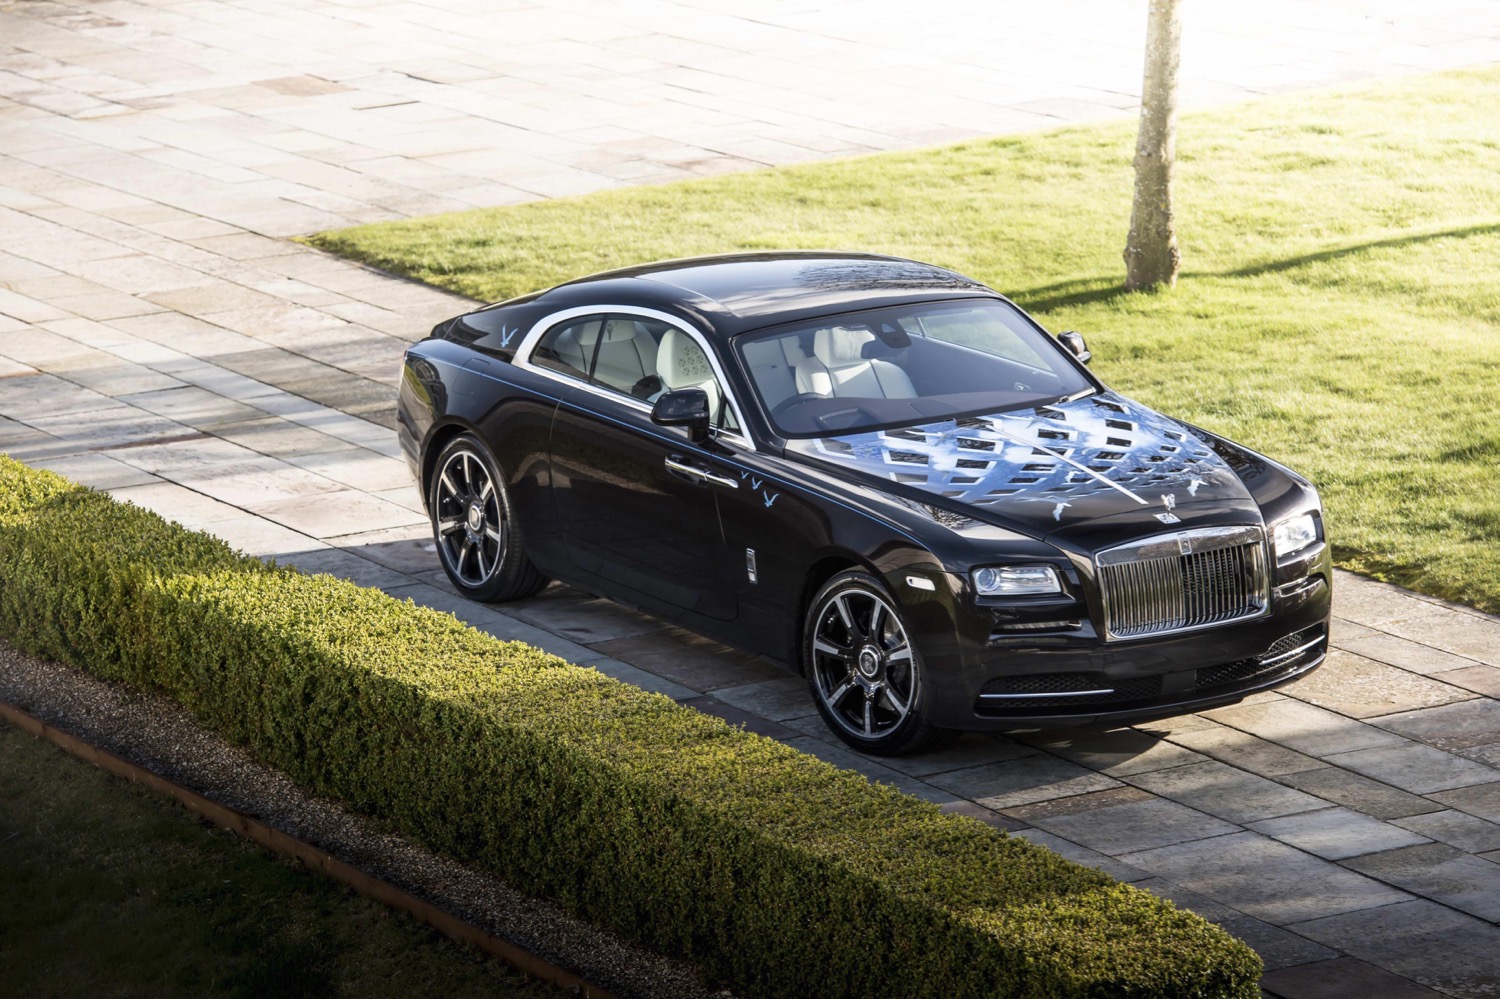 Rolls-Royce Wraith "Inspired by British Music" (Tommy)